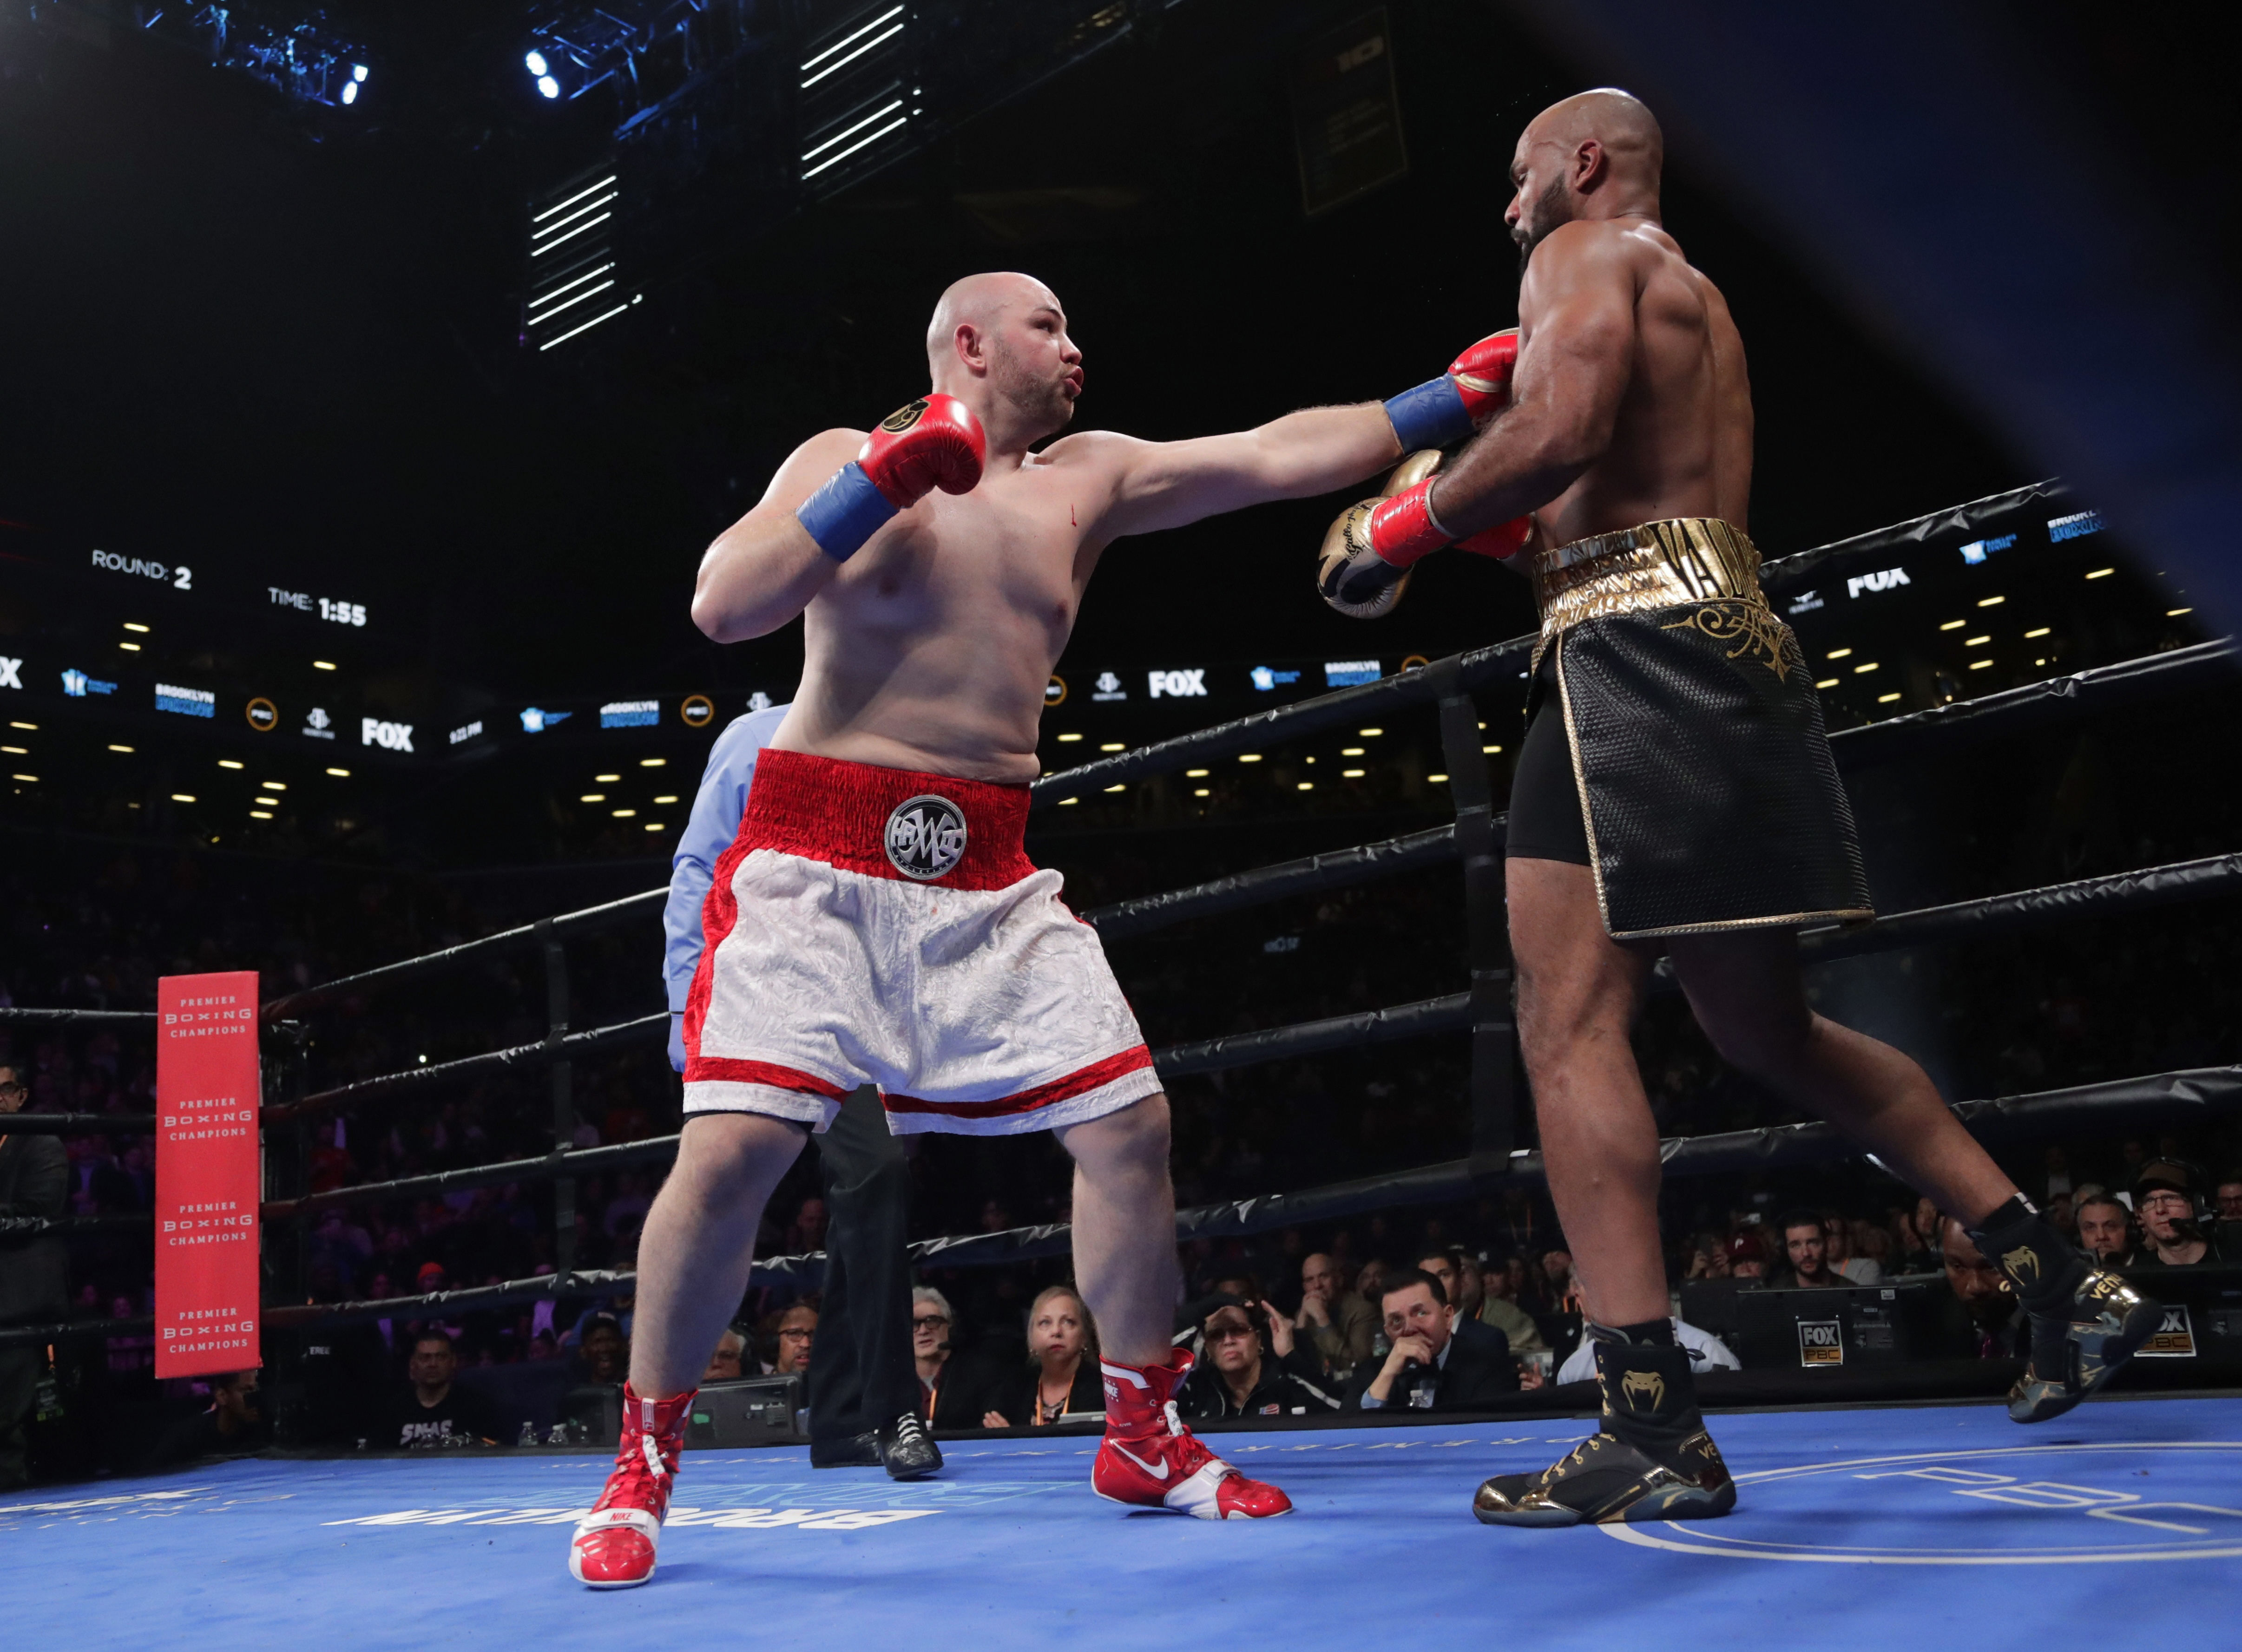 Brooklyn resident Adam Kownacki (left) hopes to win his first-ever main event bout at Barclays Center on Aug. 3, when he takes on perennial title contender Chris Arreola in the headline bout. (AP Photo/Frank Franklin II)